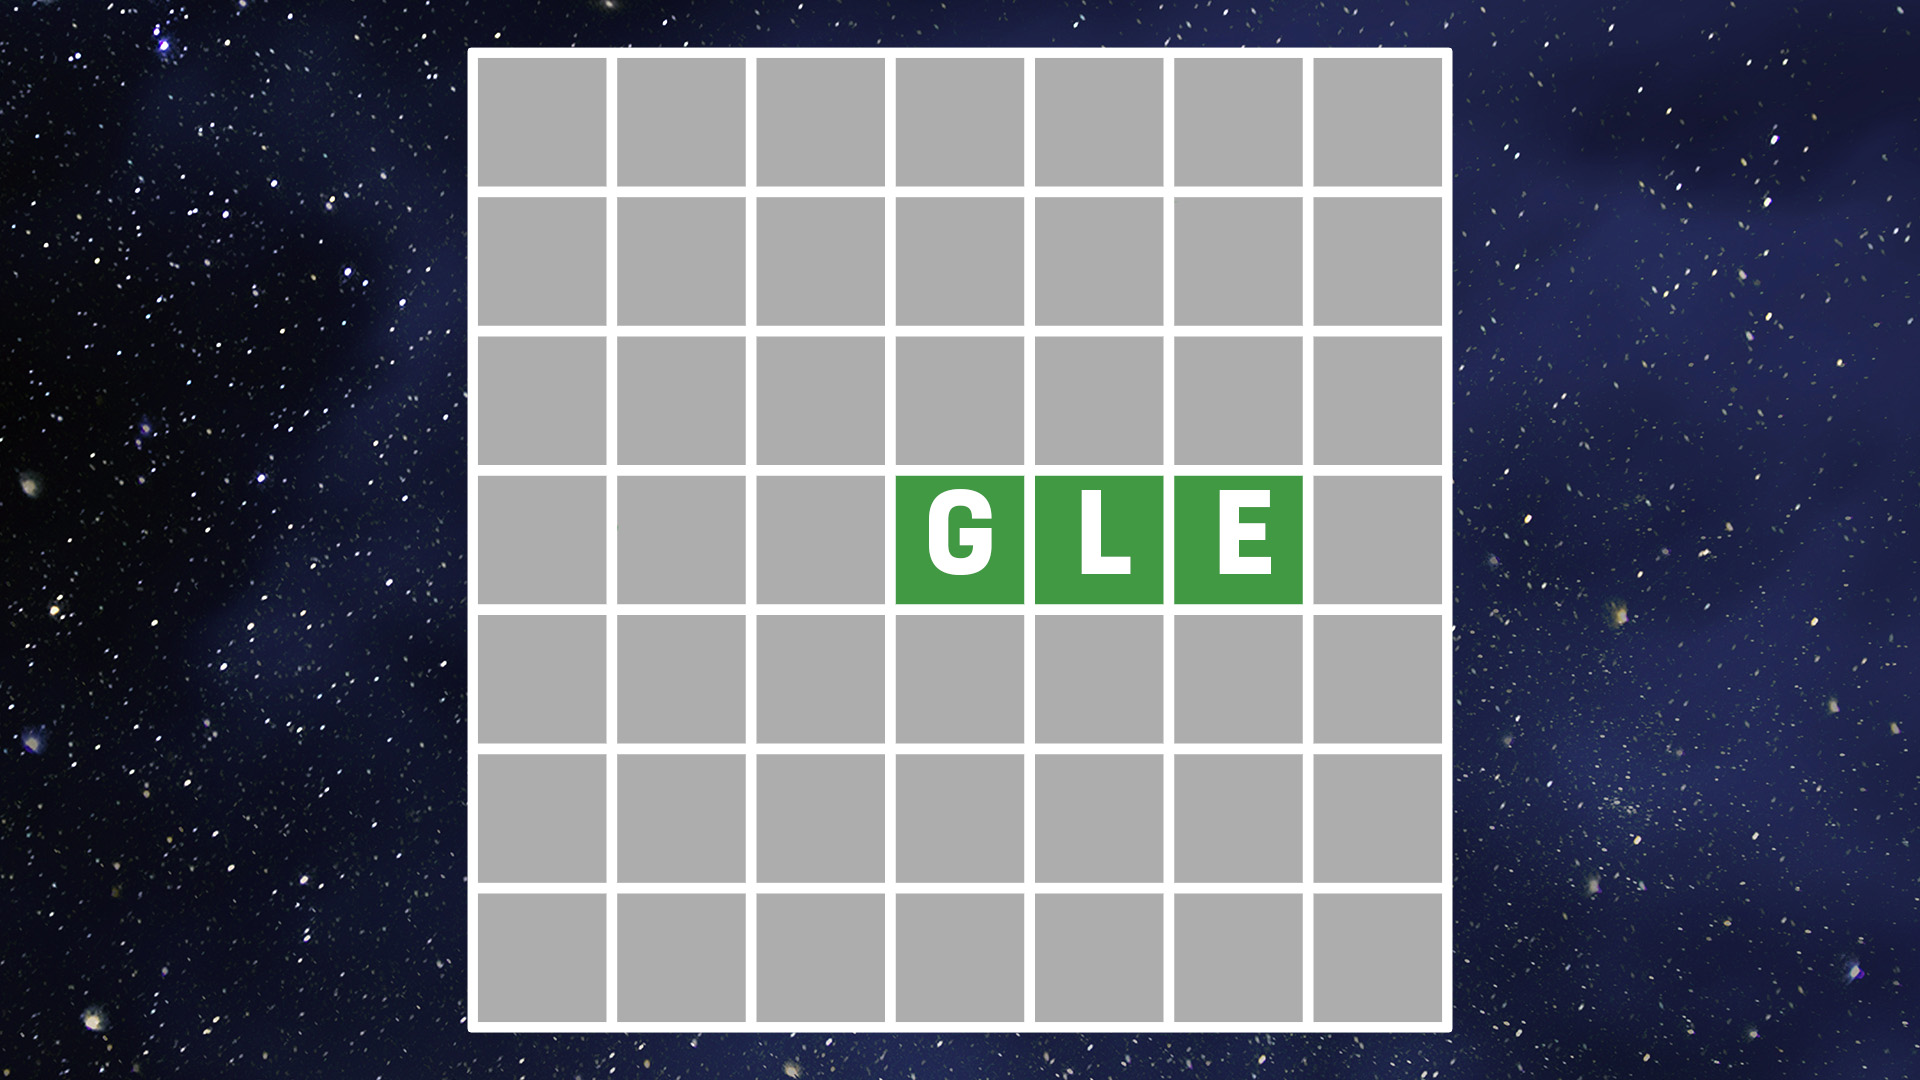 Wordle grid with the letters GLE to start you off